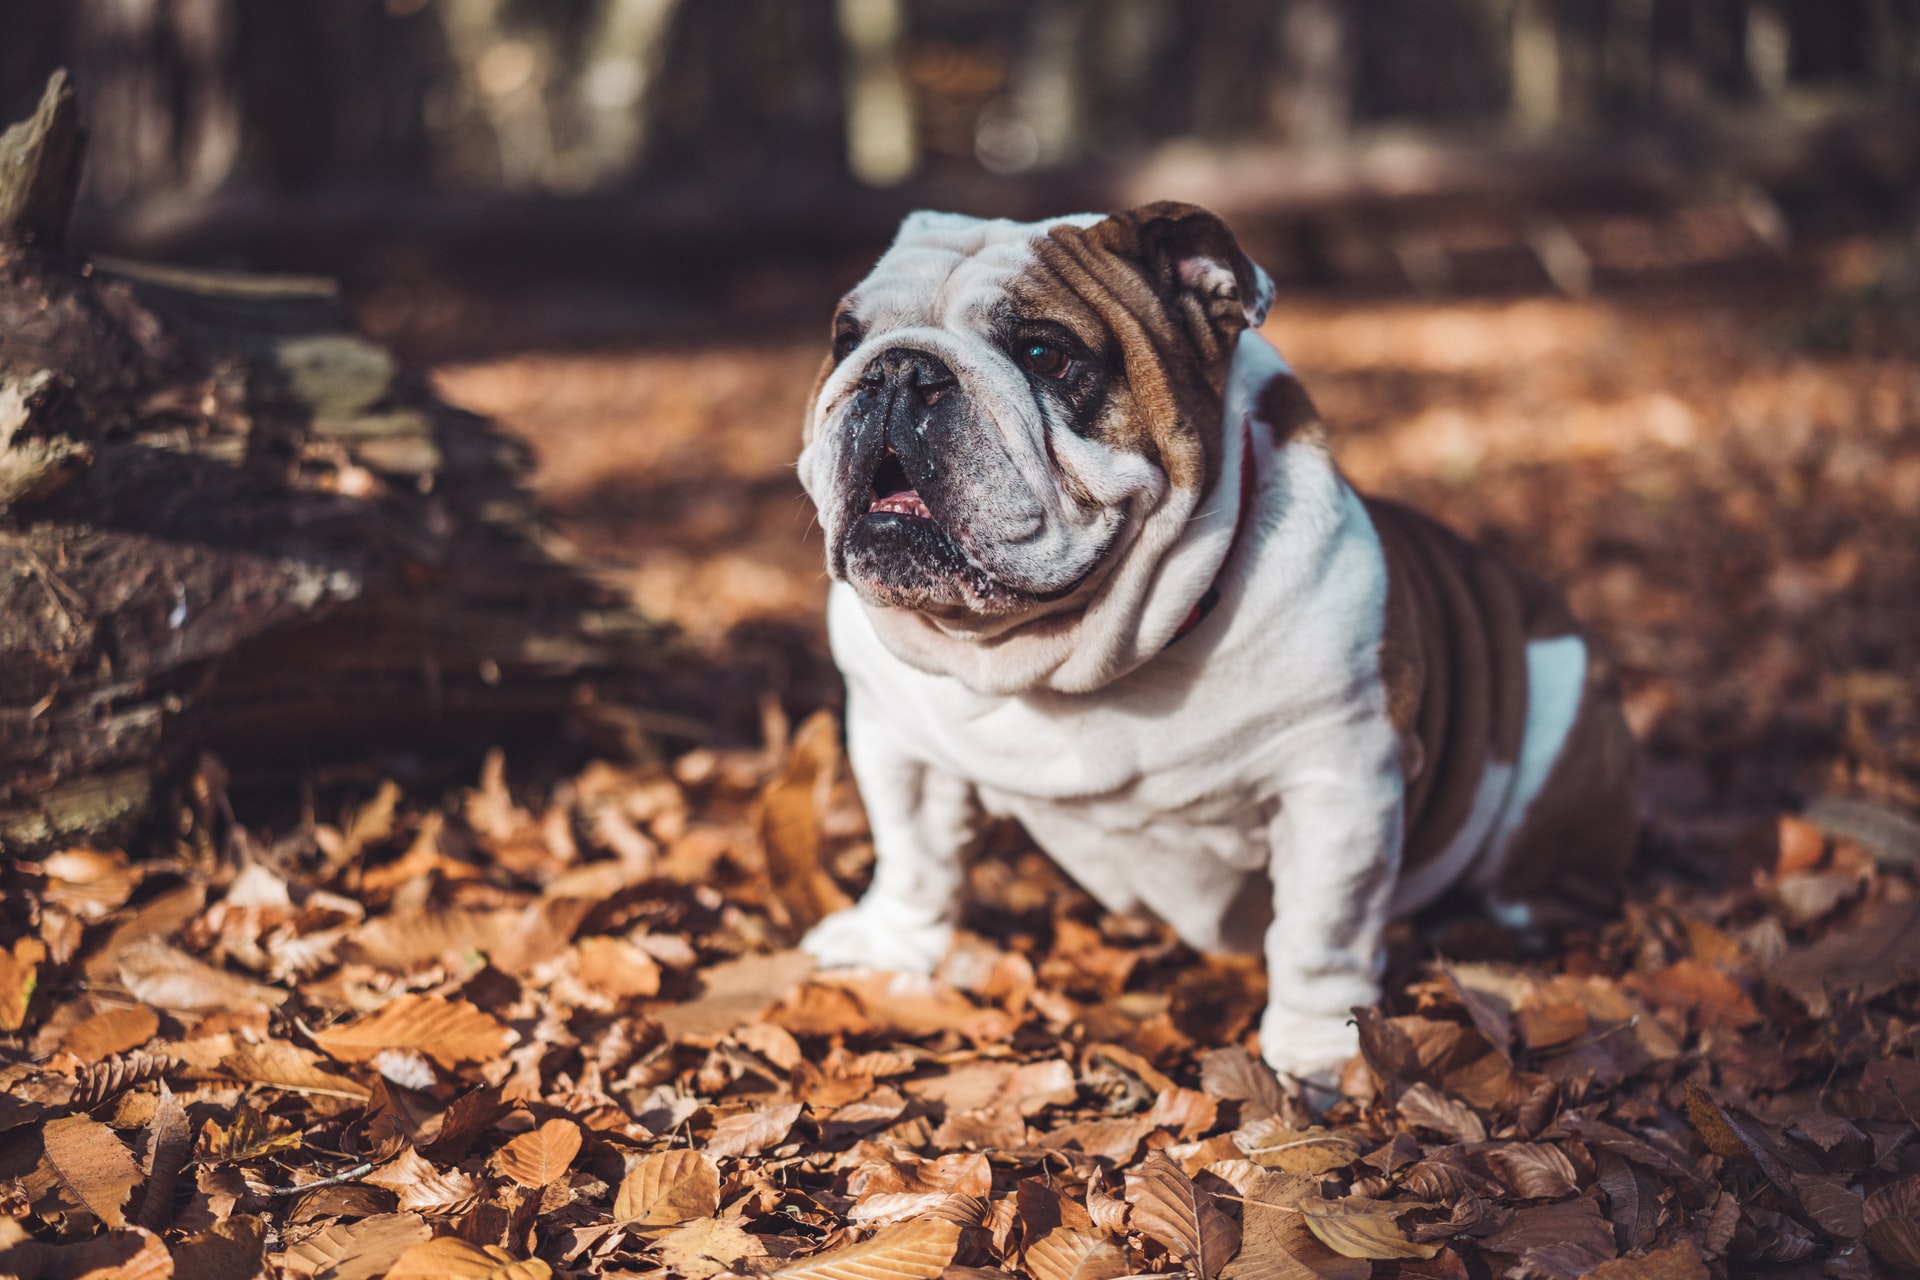 Where to Find the Best English Bulldog Puppies for Sale?